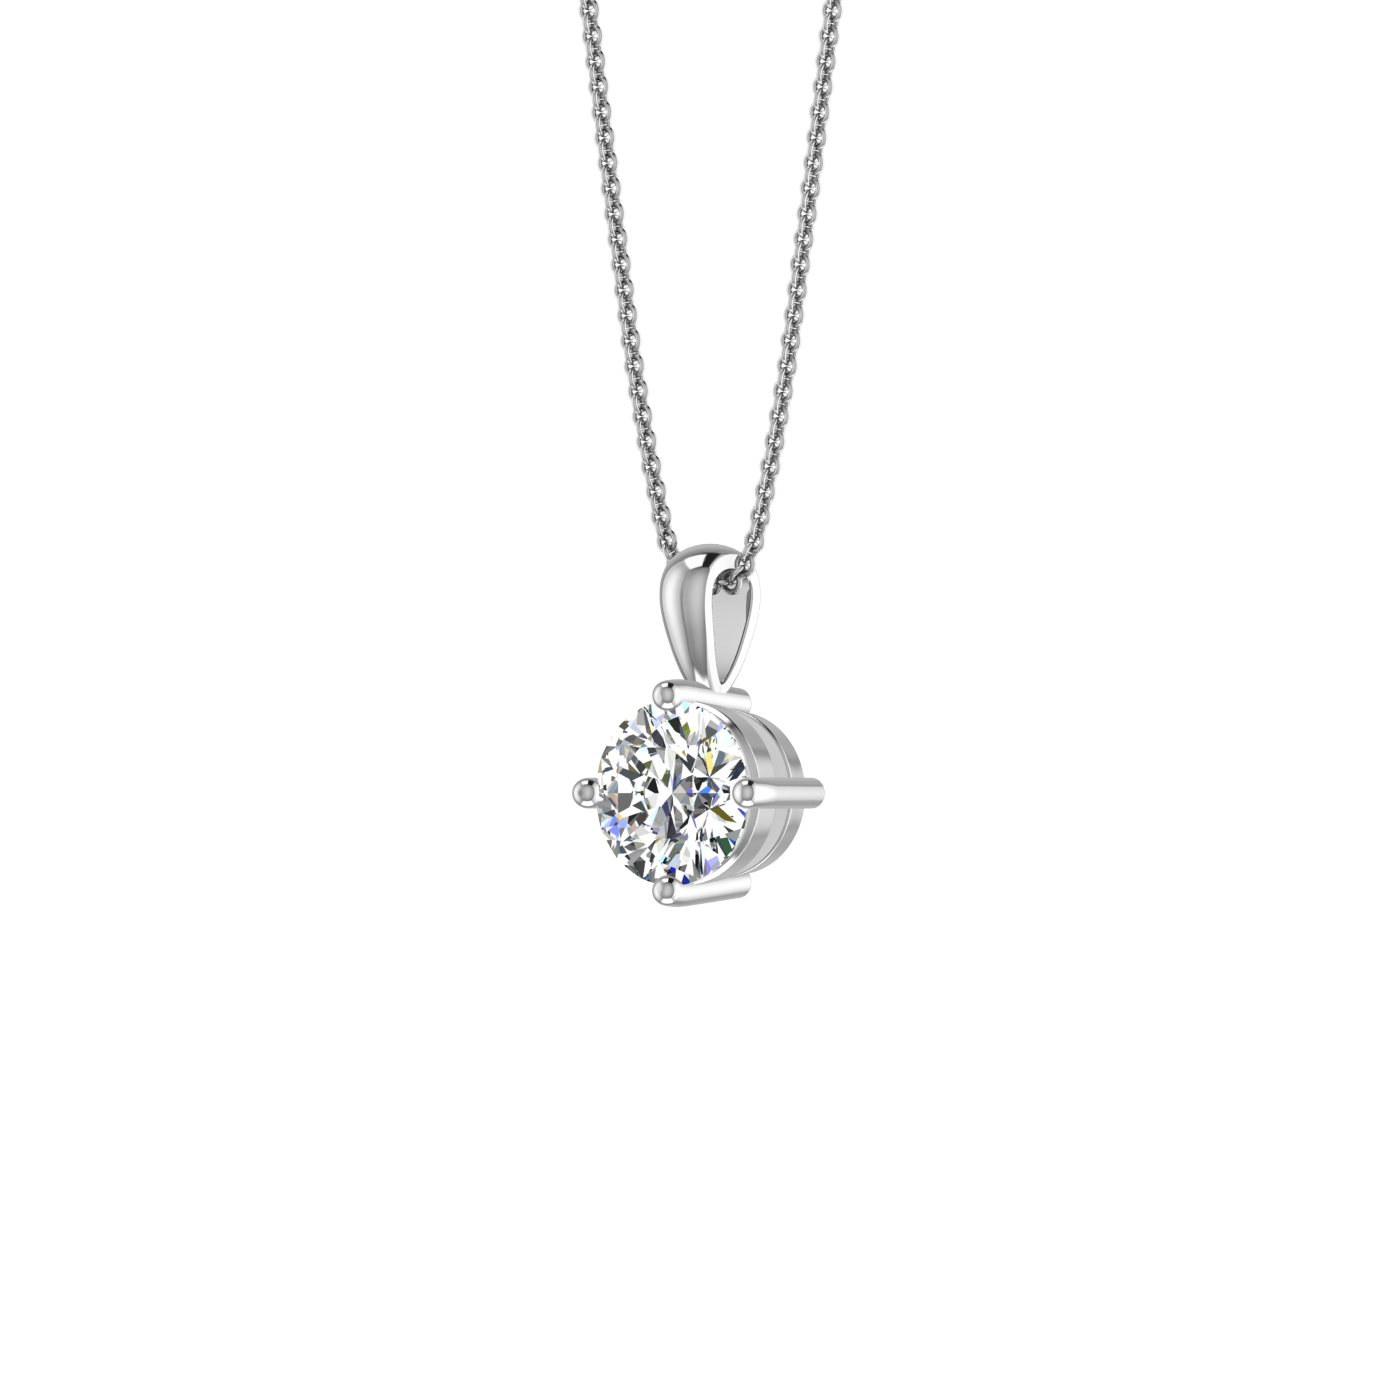 1Ct Oval Lab Created Diamond Solitaire 4 Prong Pendant Necklace 14K White  Finish | eBay